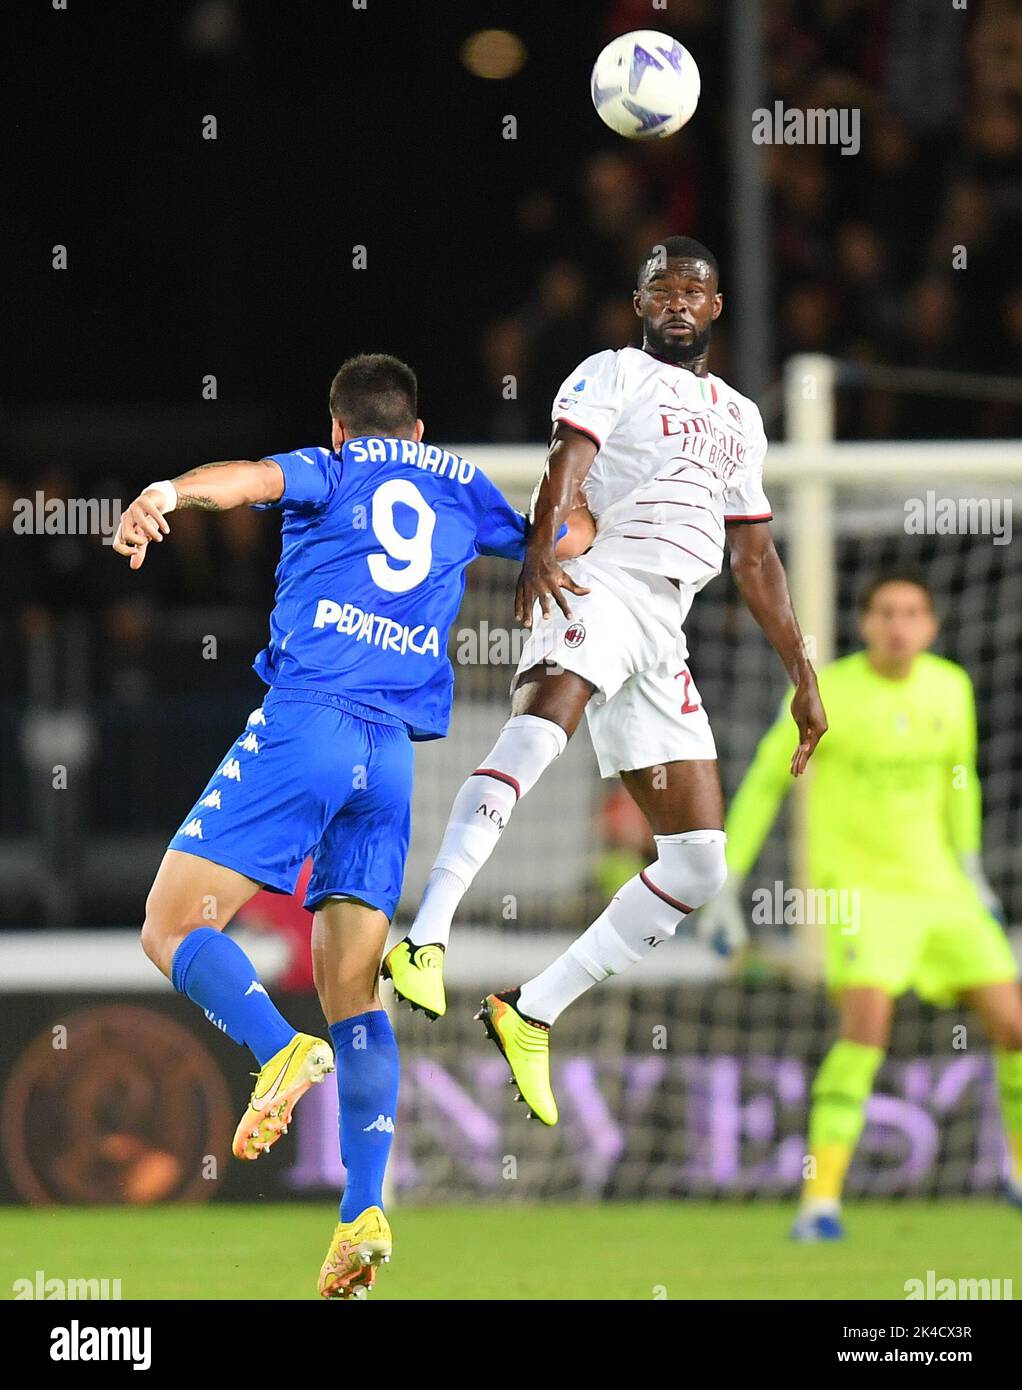 Empoli, Italy. 1st Oct, 2022. AC Milan's Fikayo Tomori (R) vies with Empoli's Martin Satriano during a Serie A football match between AC Milan and Empoli in Empoli, Italy, on Oct. 1, 2022. Credit: Daniele Mascolo/Xinhua/Alamy Live News Stock Photo